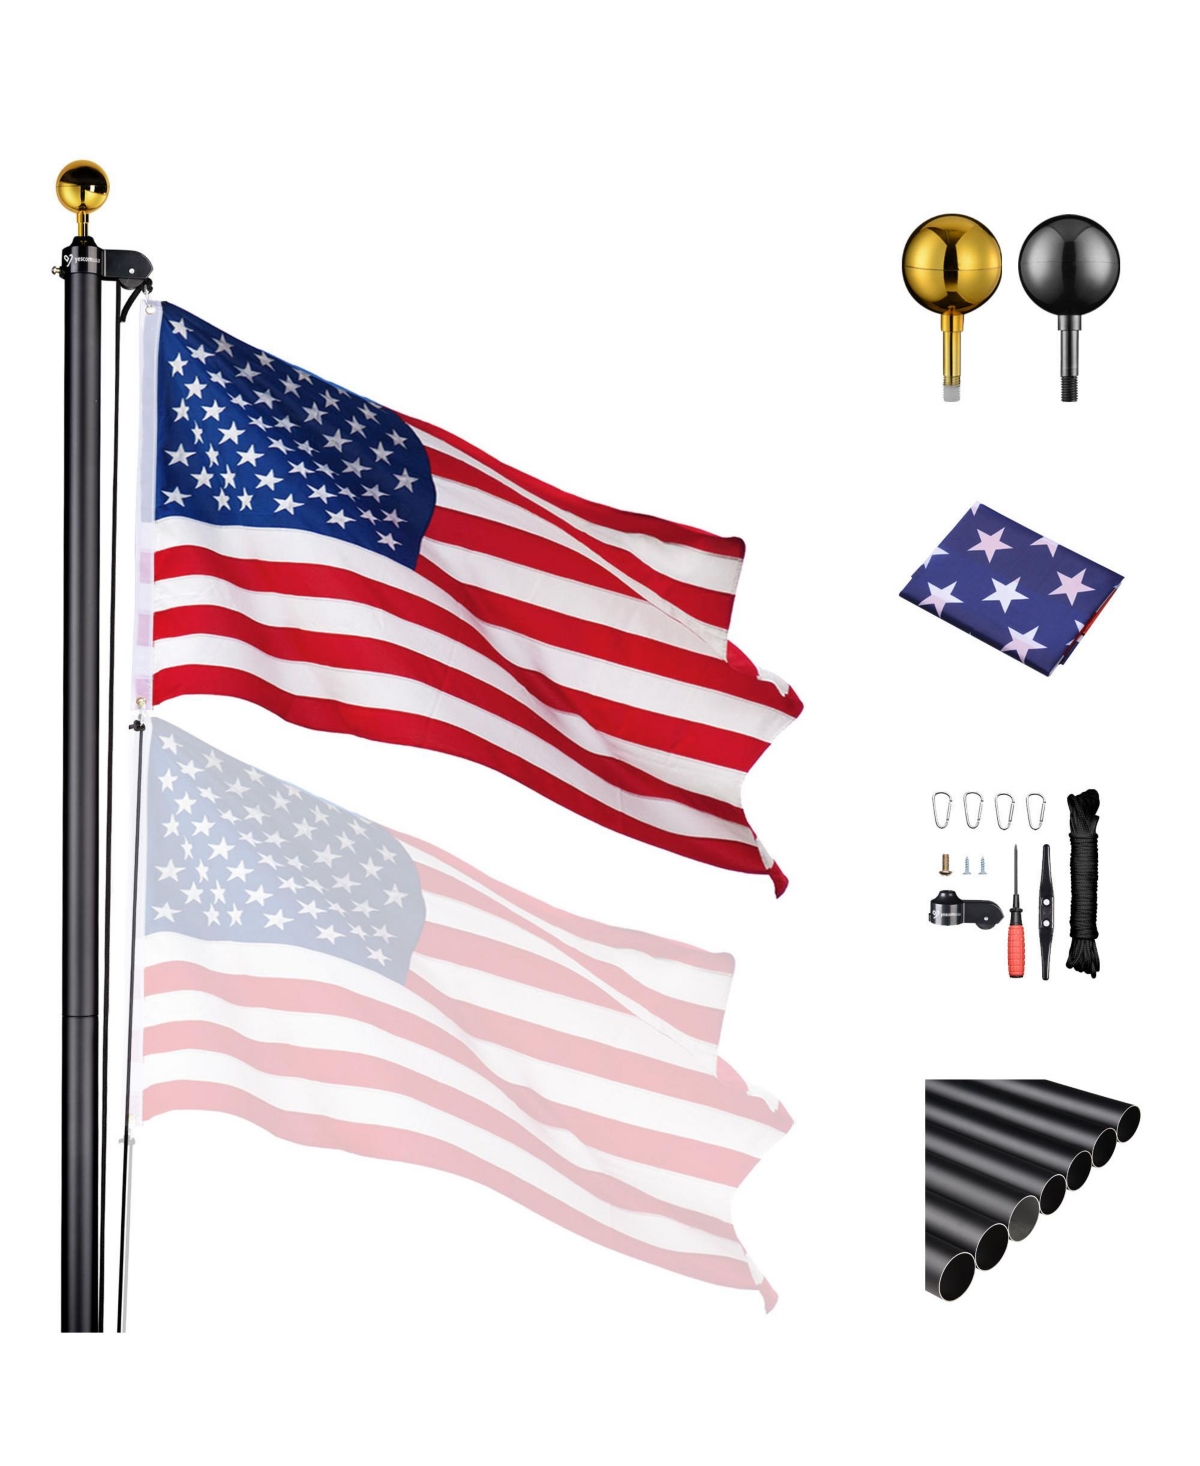 25 Ft Aluminum Sectional Flagpole with 3x5 Ft Us Flag Gold Ball Outdoor - Black